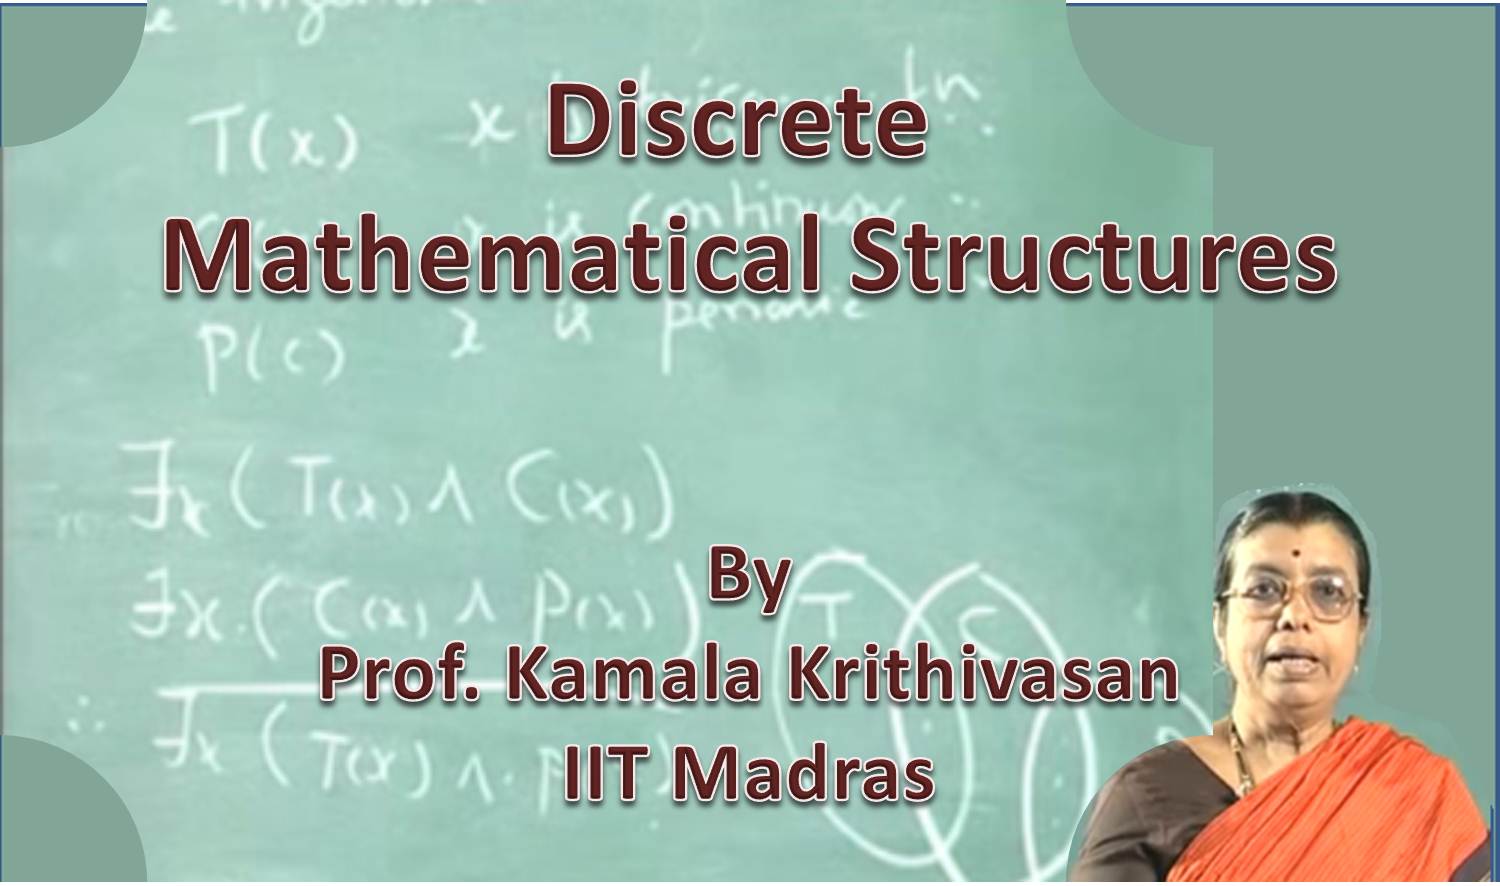 http://study.aisectonline.com/images/SubCategory/Video Lectures on Discrete Mathematical Structures by Prof. Kamala Krithivasan,  IIT Madras.jpg